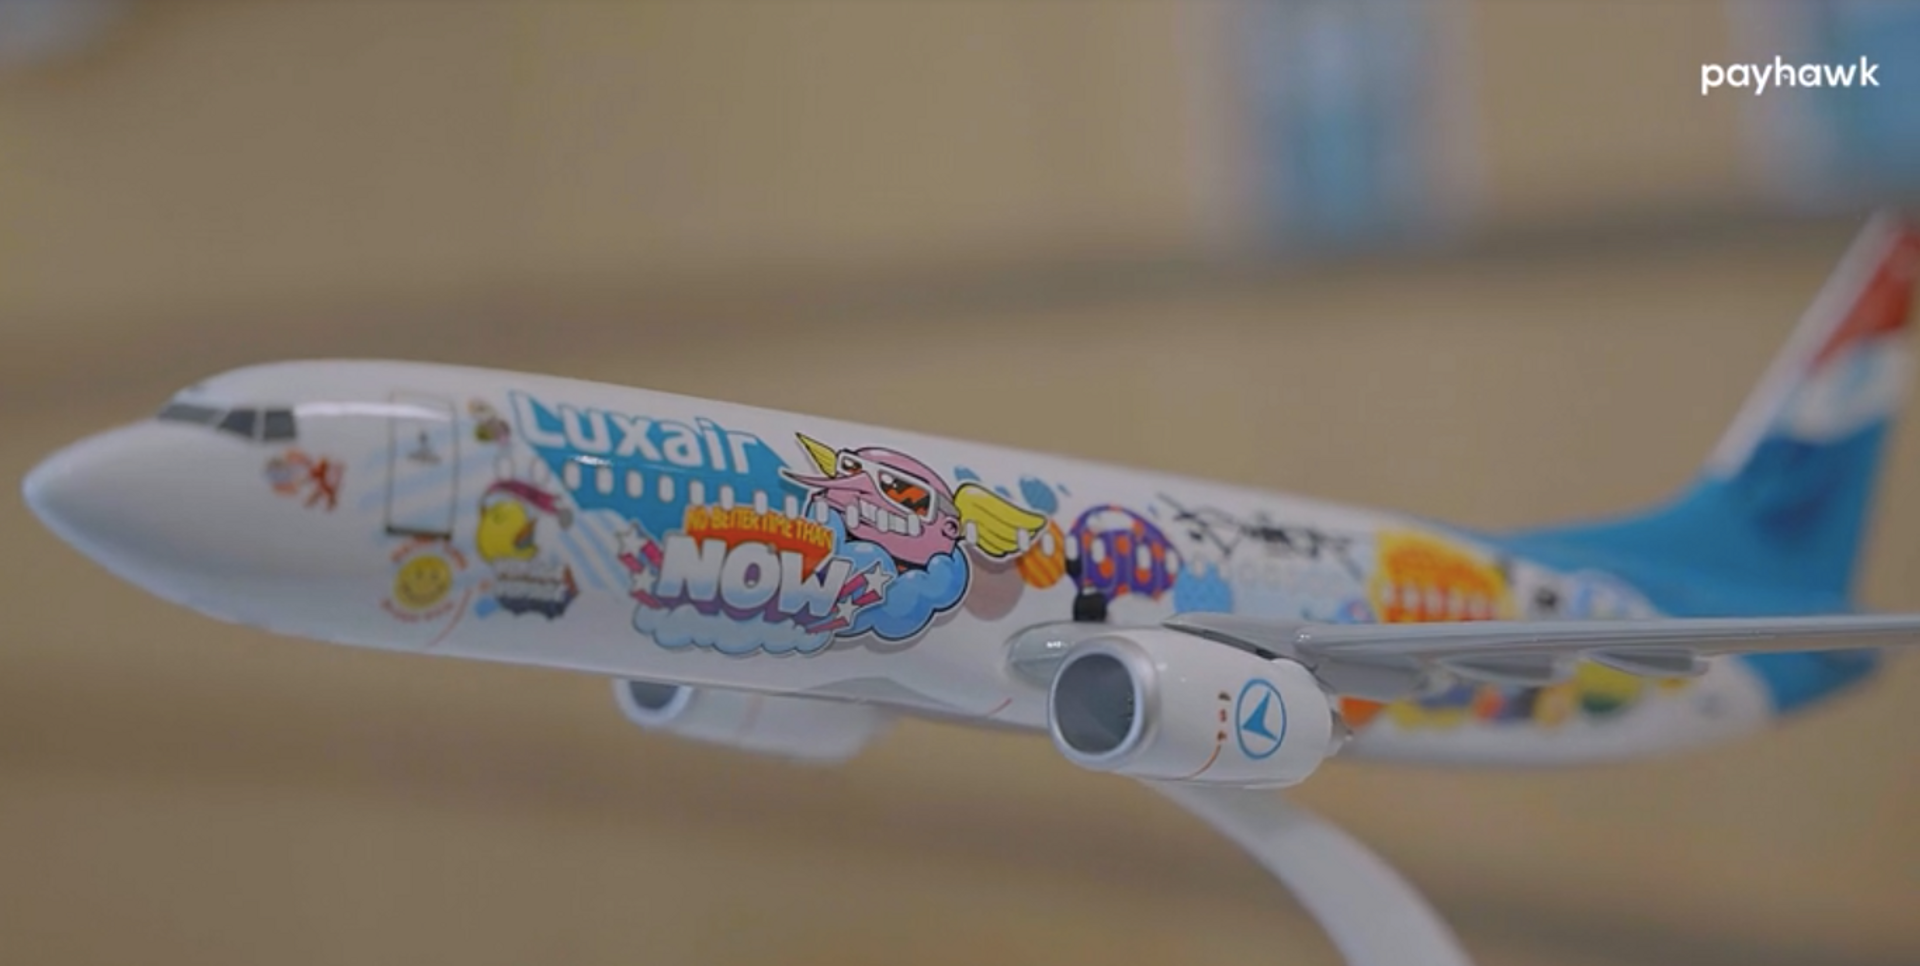 An image of the toy Luxair plane. How Payhawk helped them become a cashless business